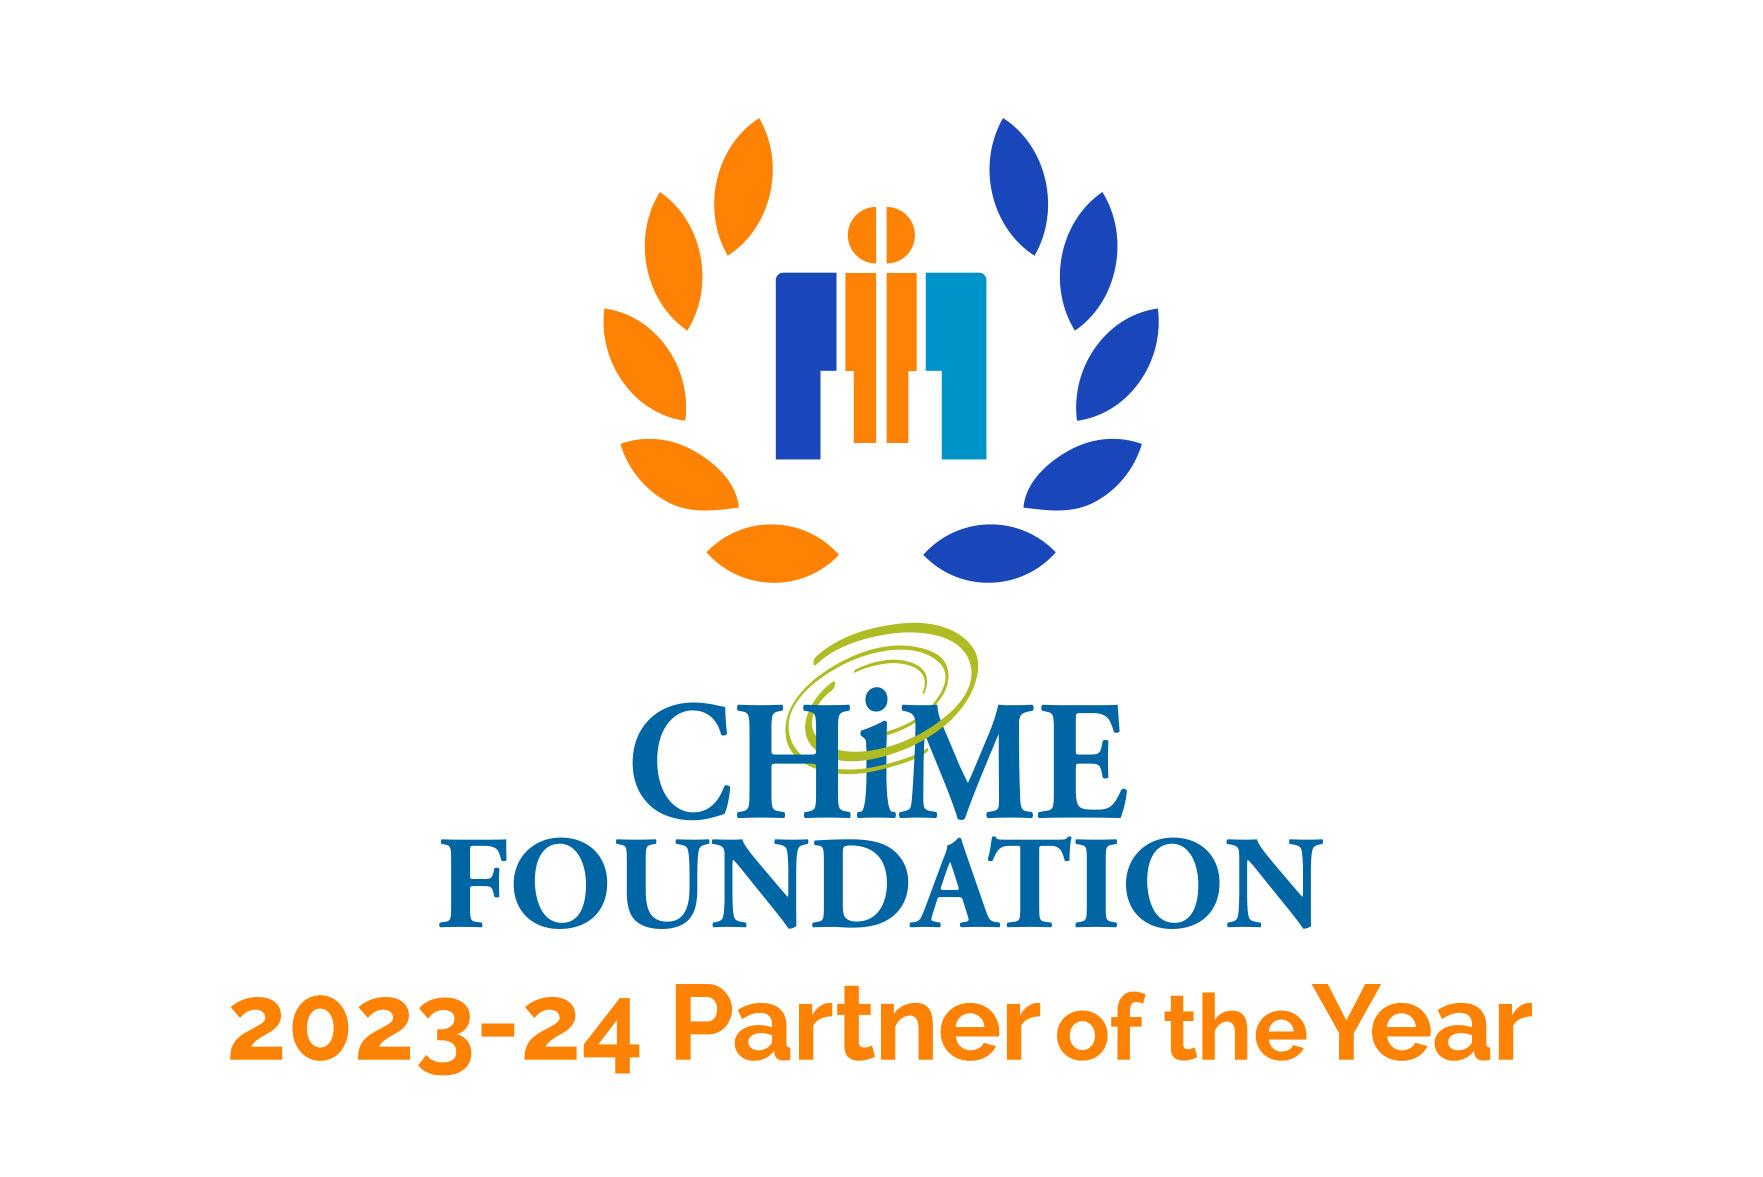 Chime Foundation 2023-24 Partner of the Year Logo